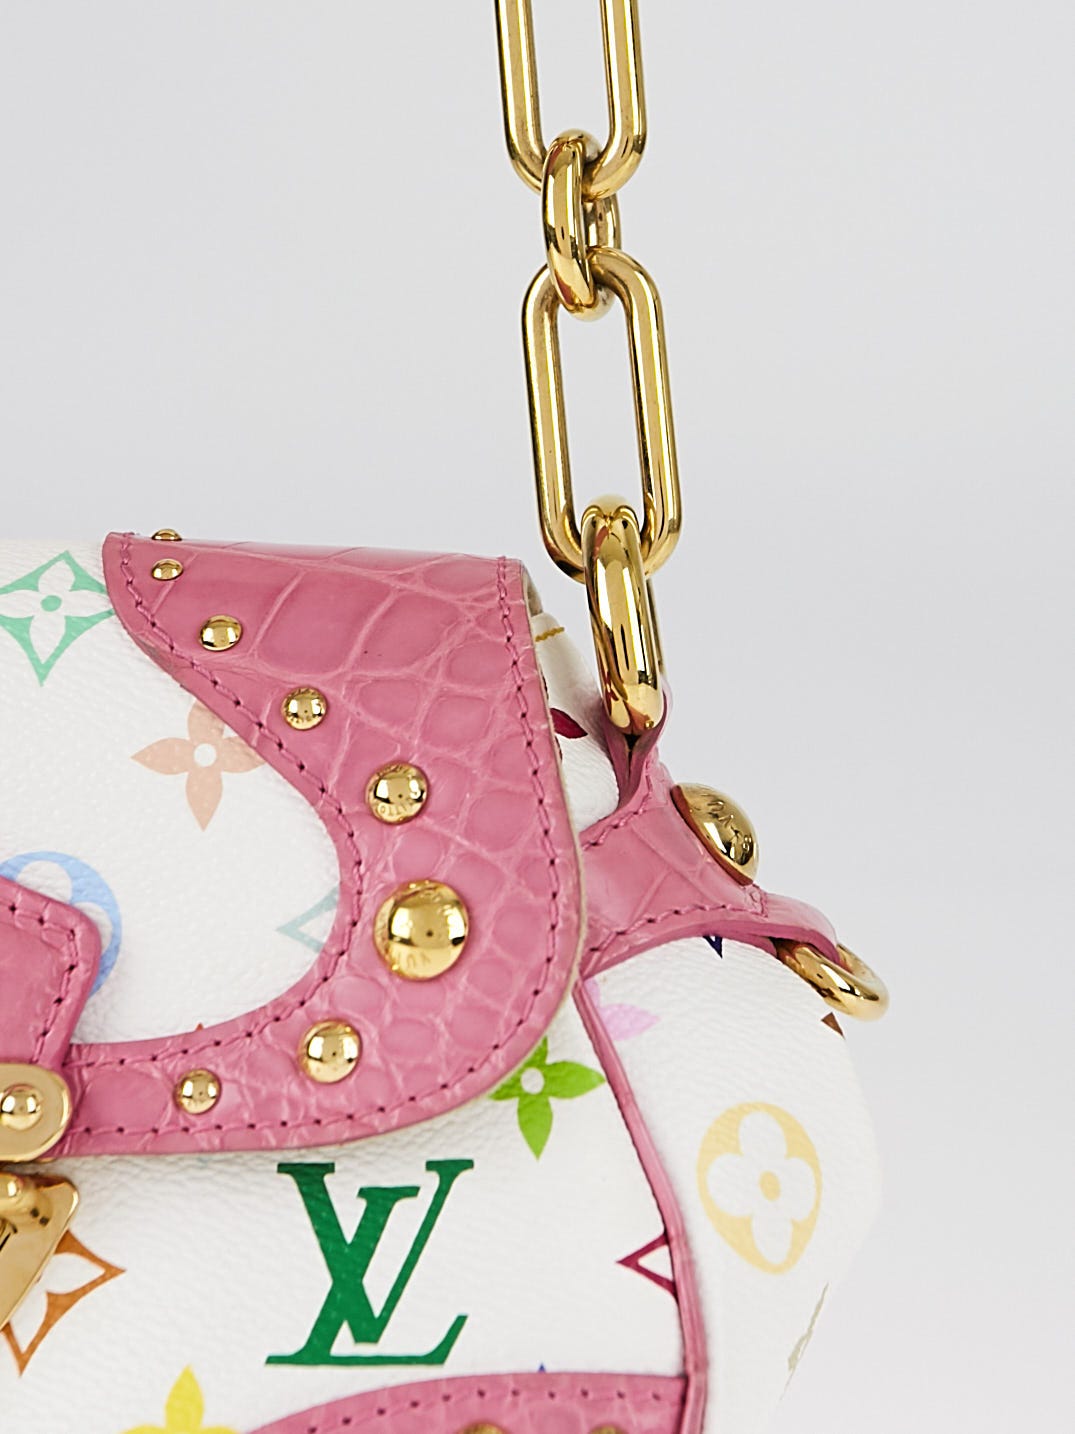 A LIMITED EDITION PINK ALLIGATOR MONOGRAM MULTICOLORE MARILYN